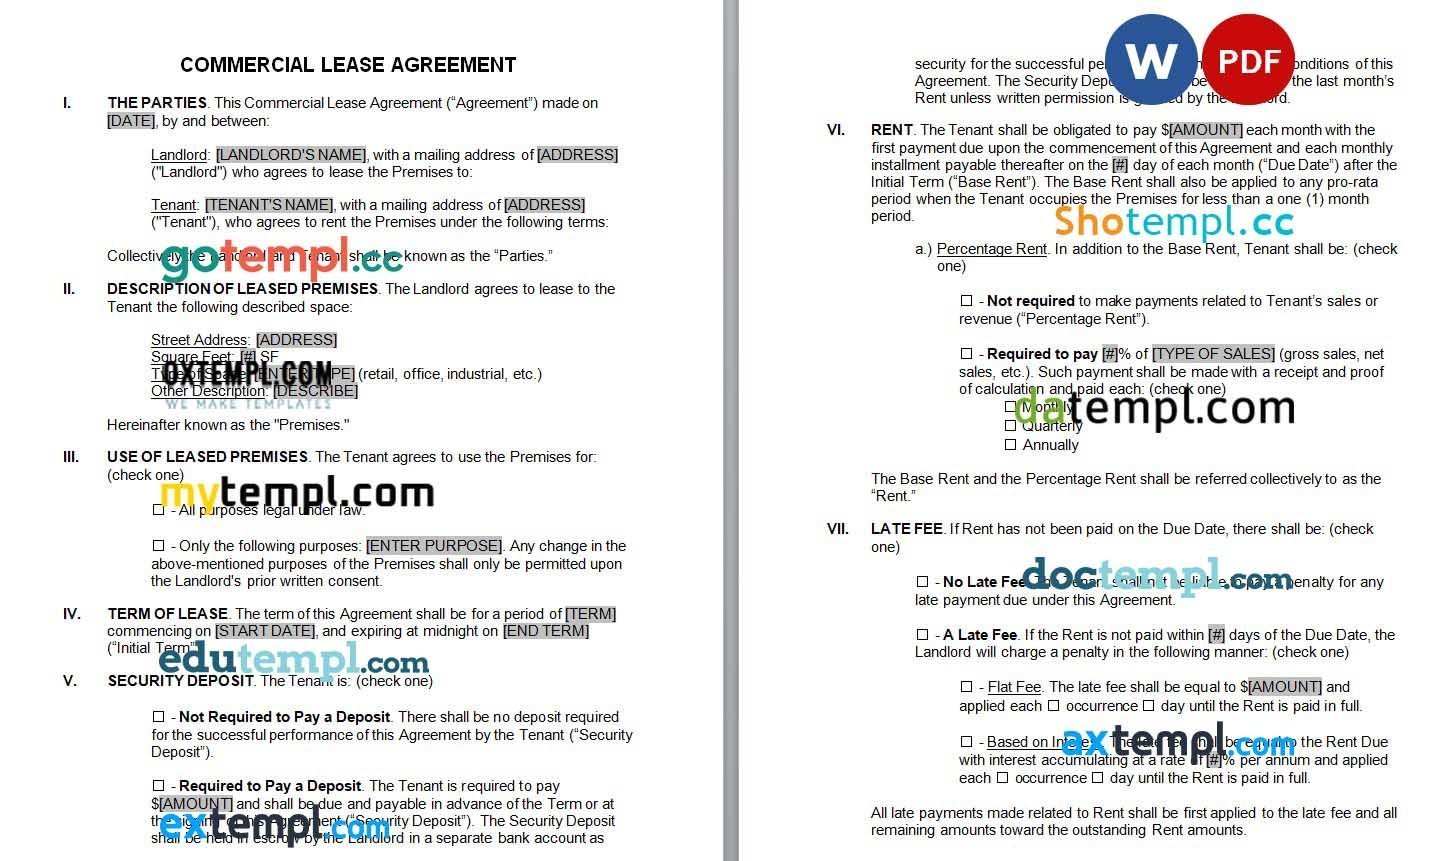 Commercial Lease Agreement Word example, fully editable